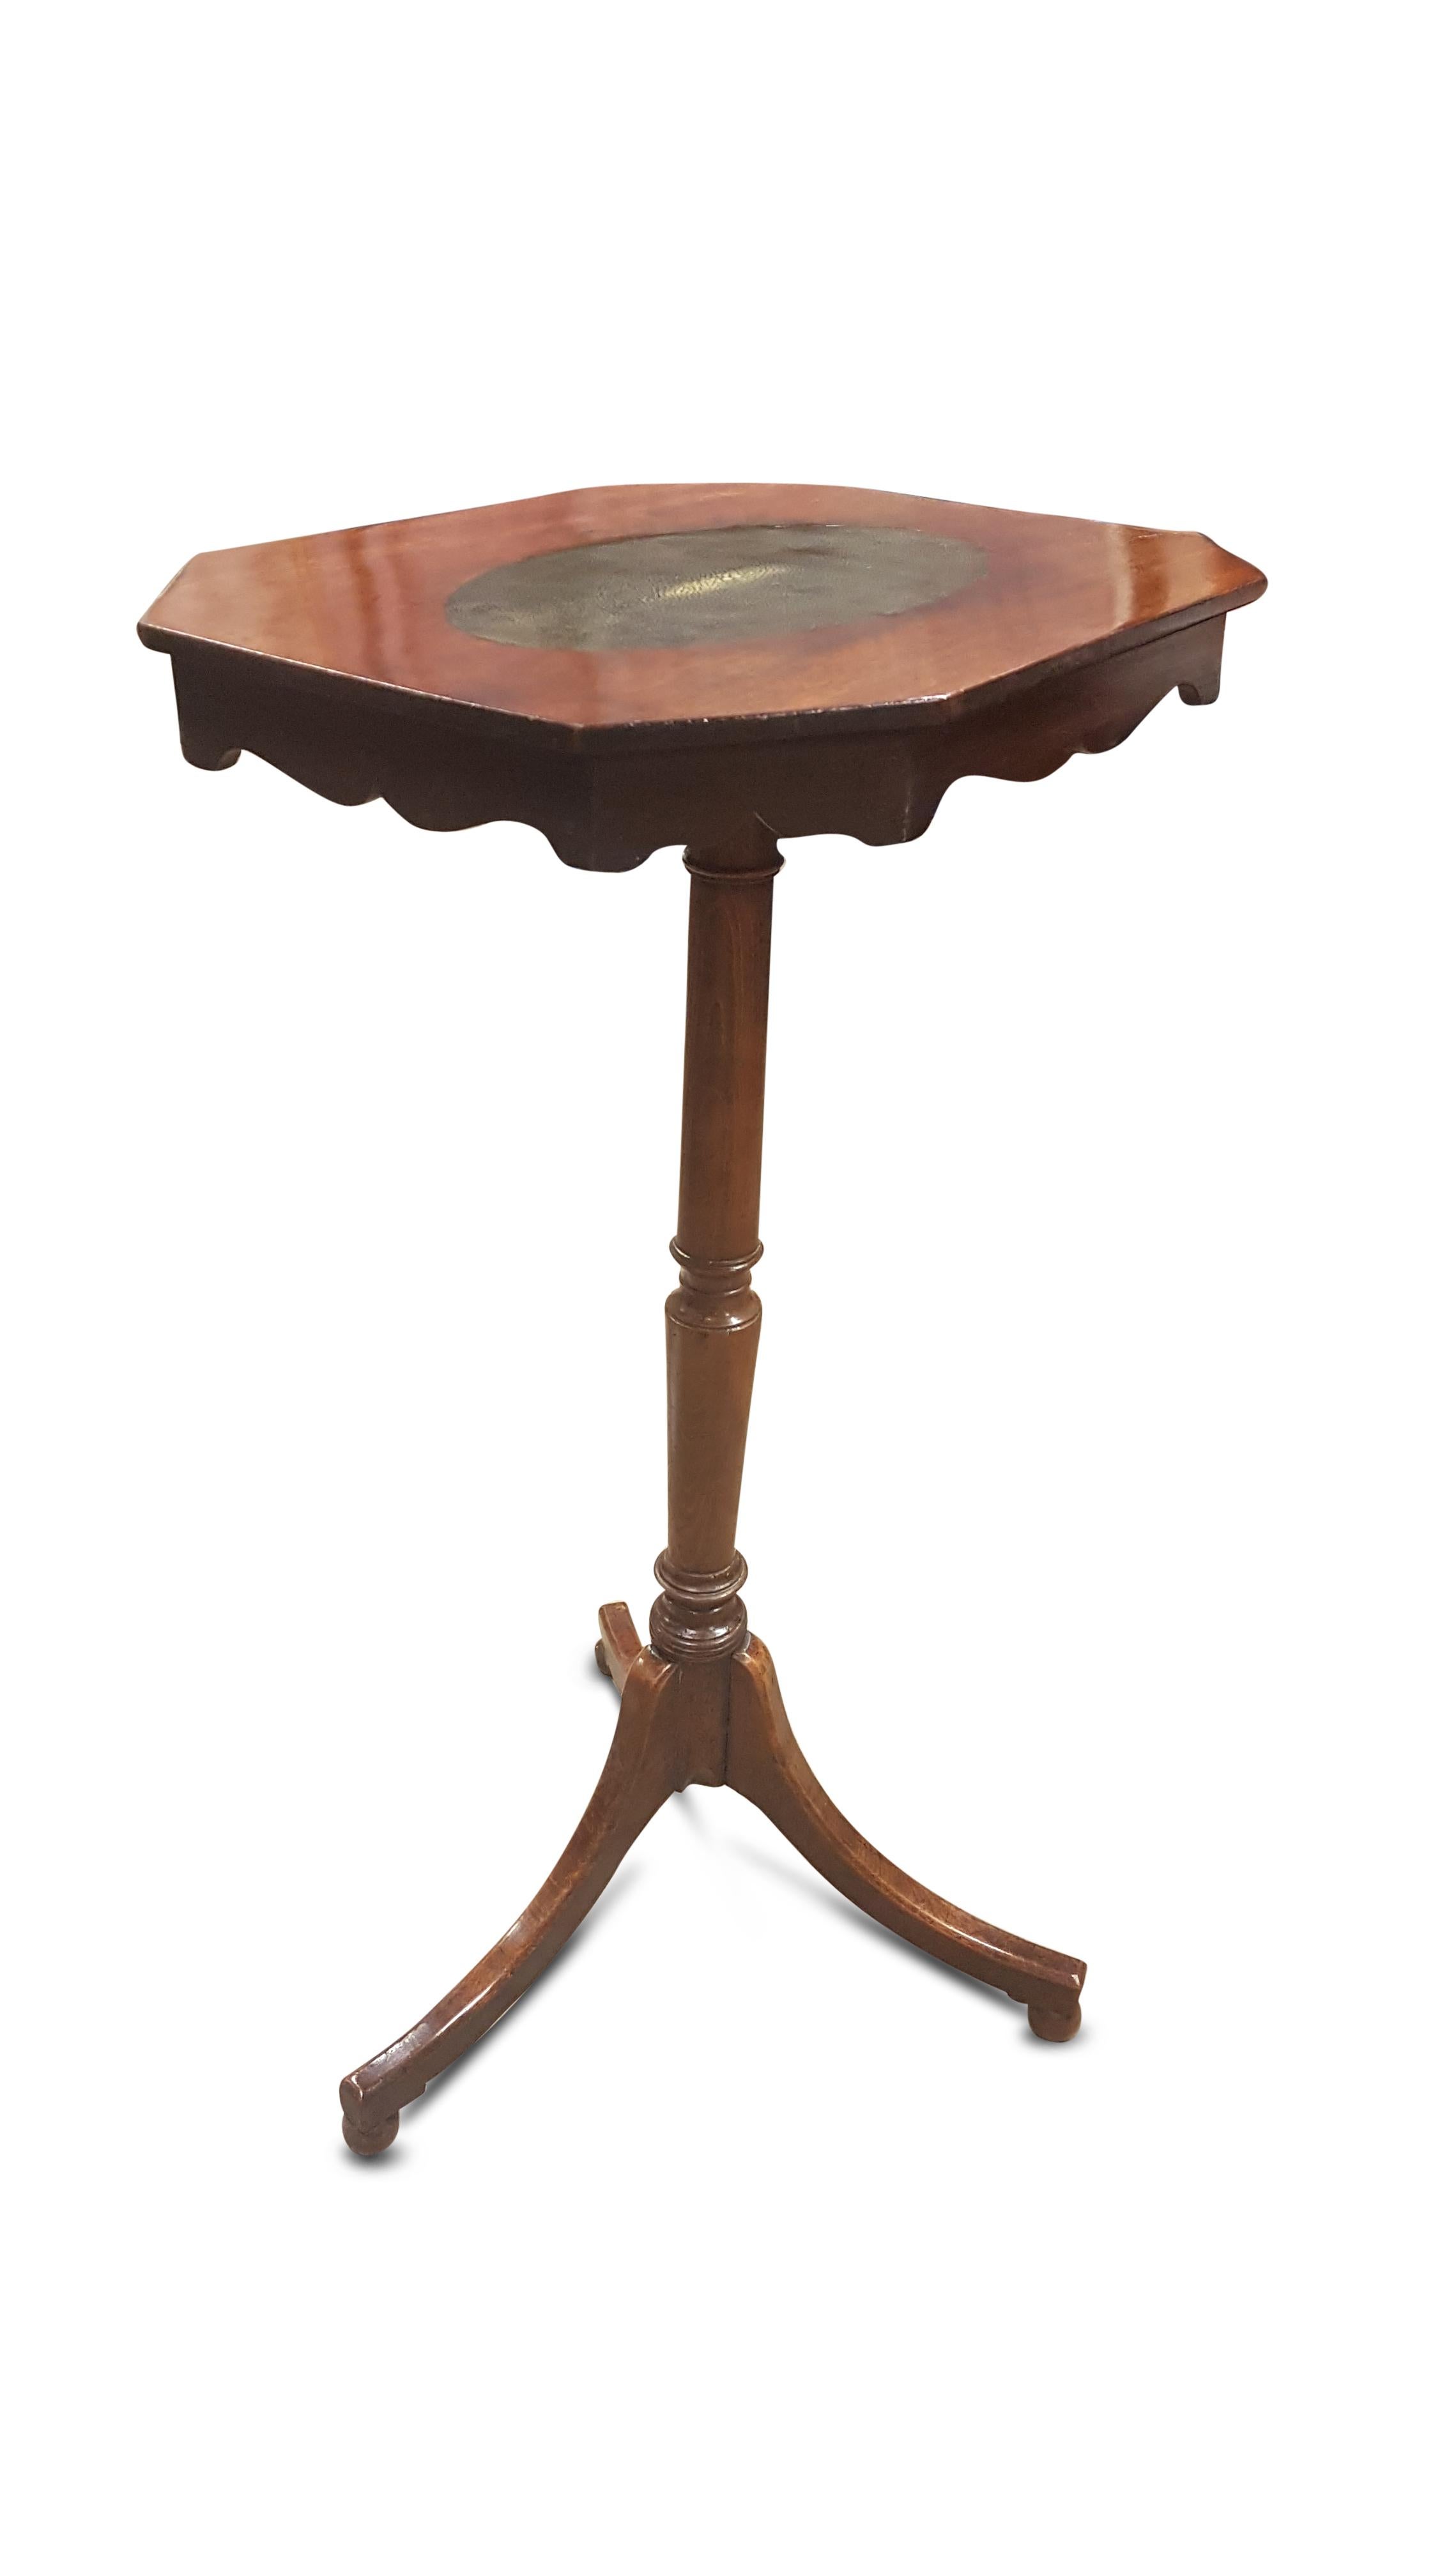 A rather nice late George 3rd mahogany tripod table with mahogany top and legs and stained beech column. The swept feet have a small turned ball under each foot at the tip. Where the column meets the top it as had the screws replaced as can be seen